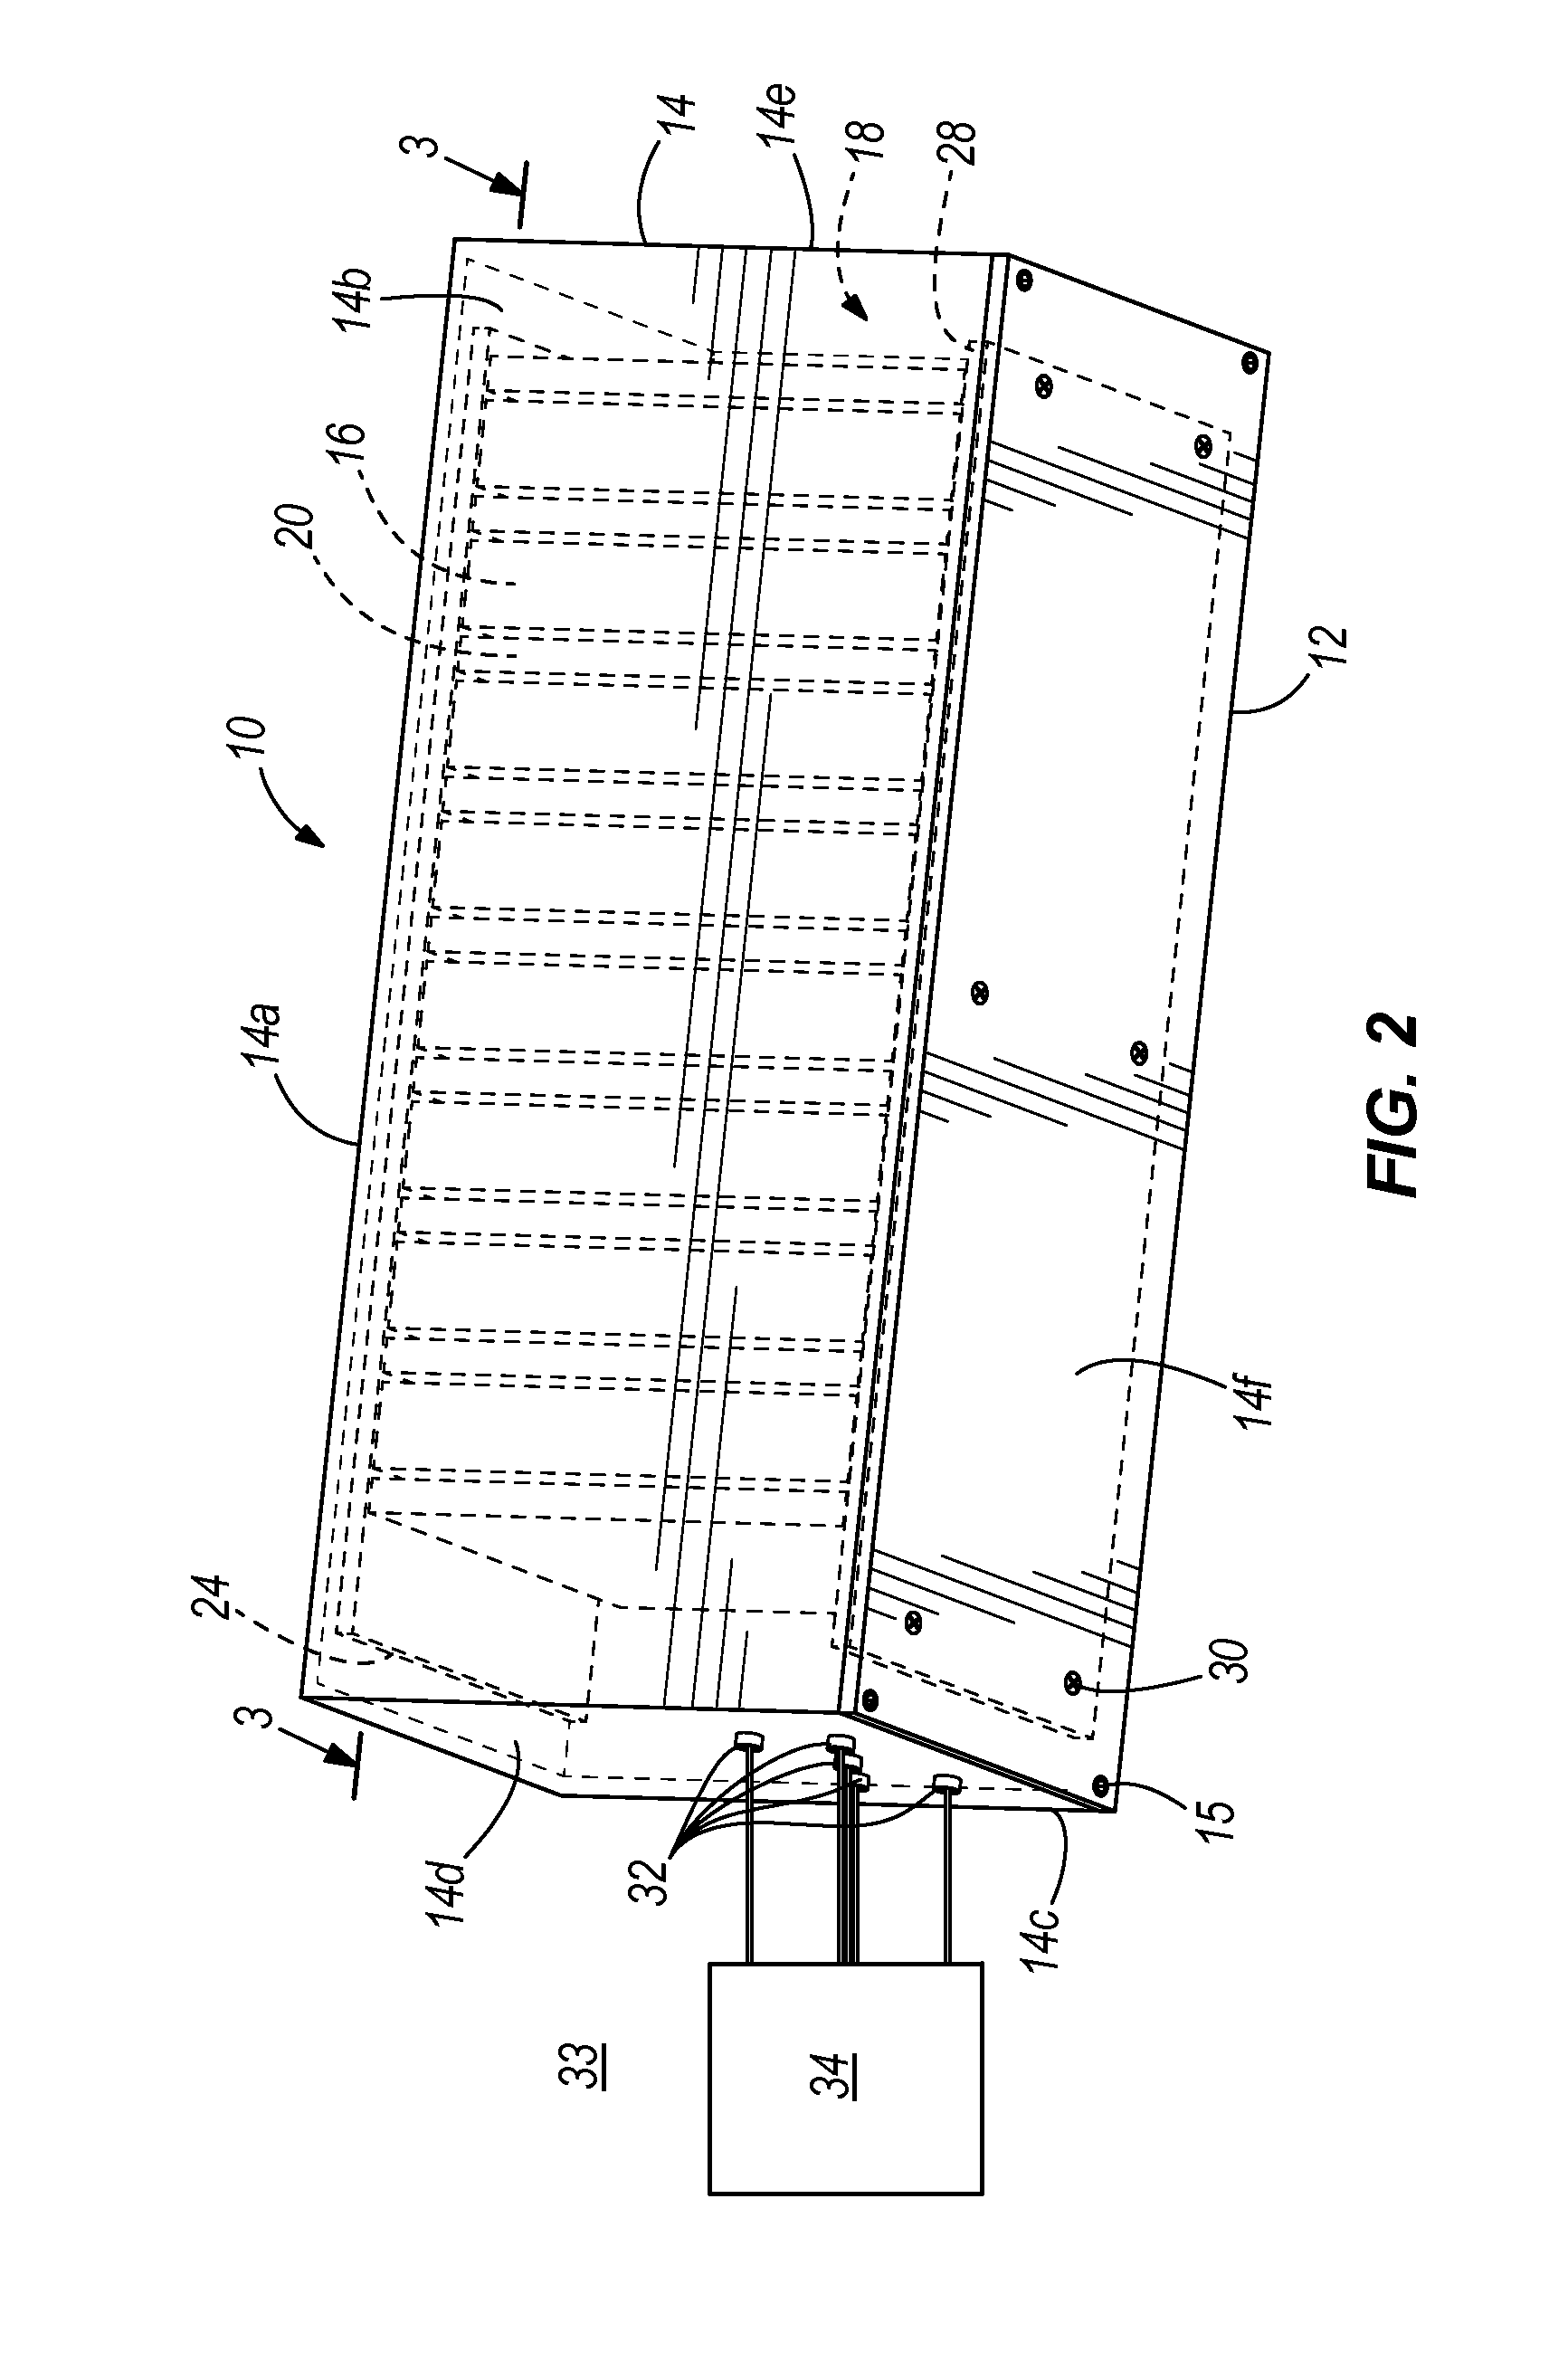 Chassis system and method for holding and protecting electronic modules